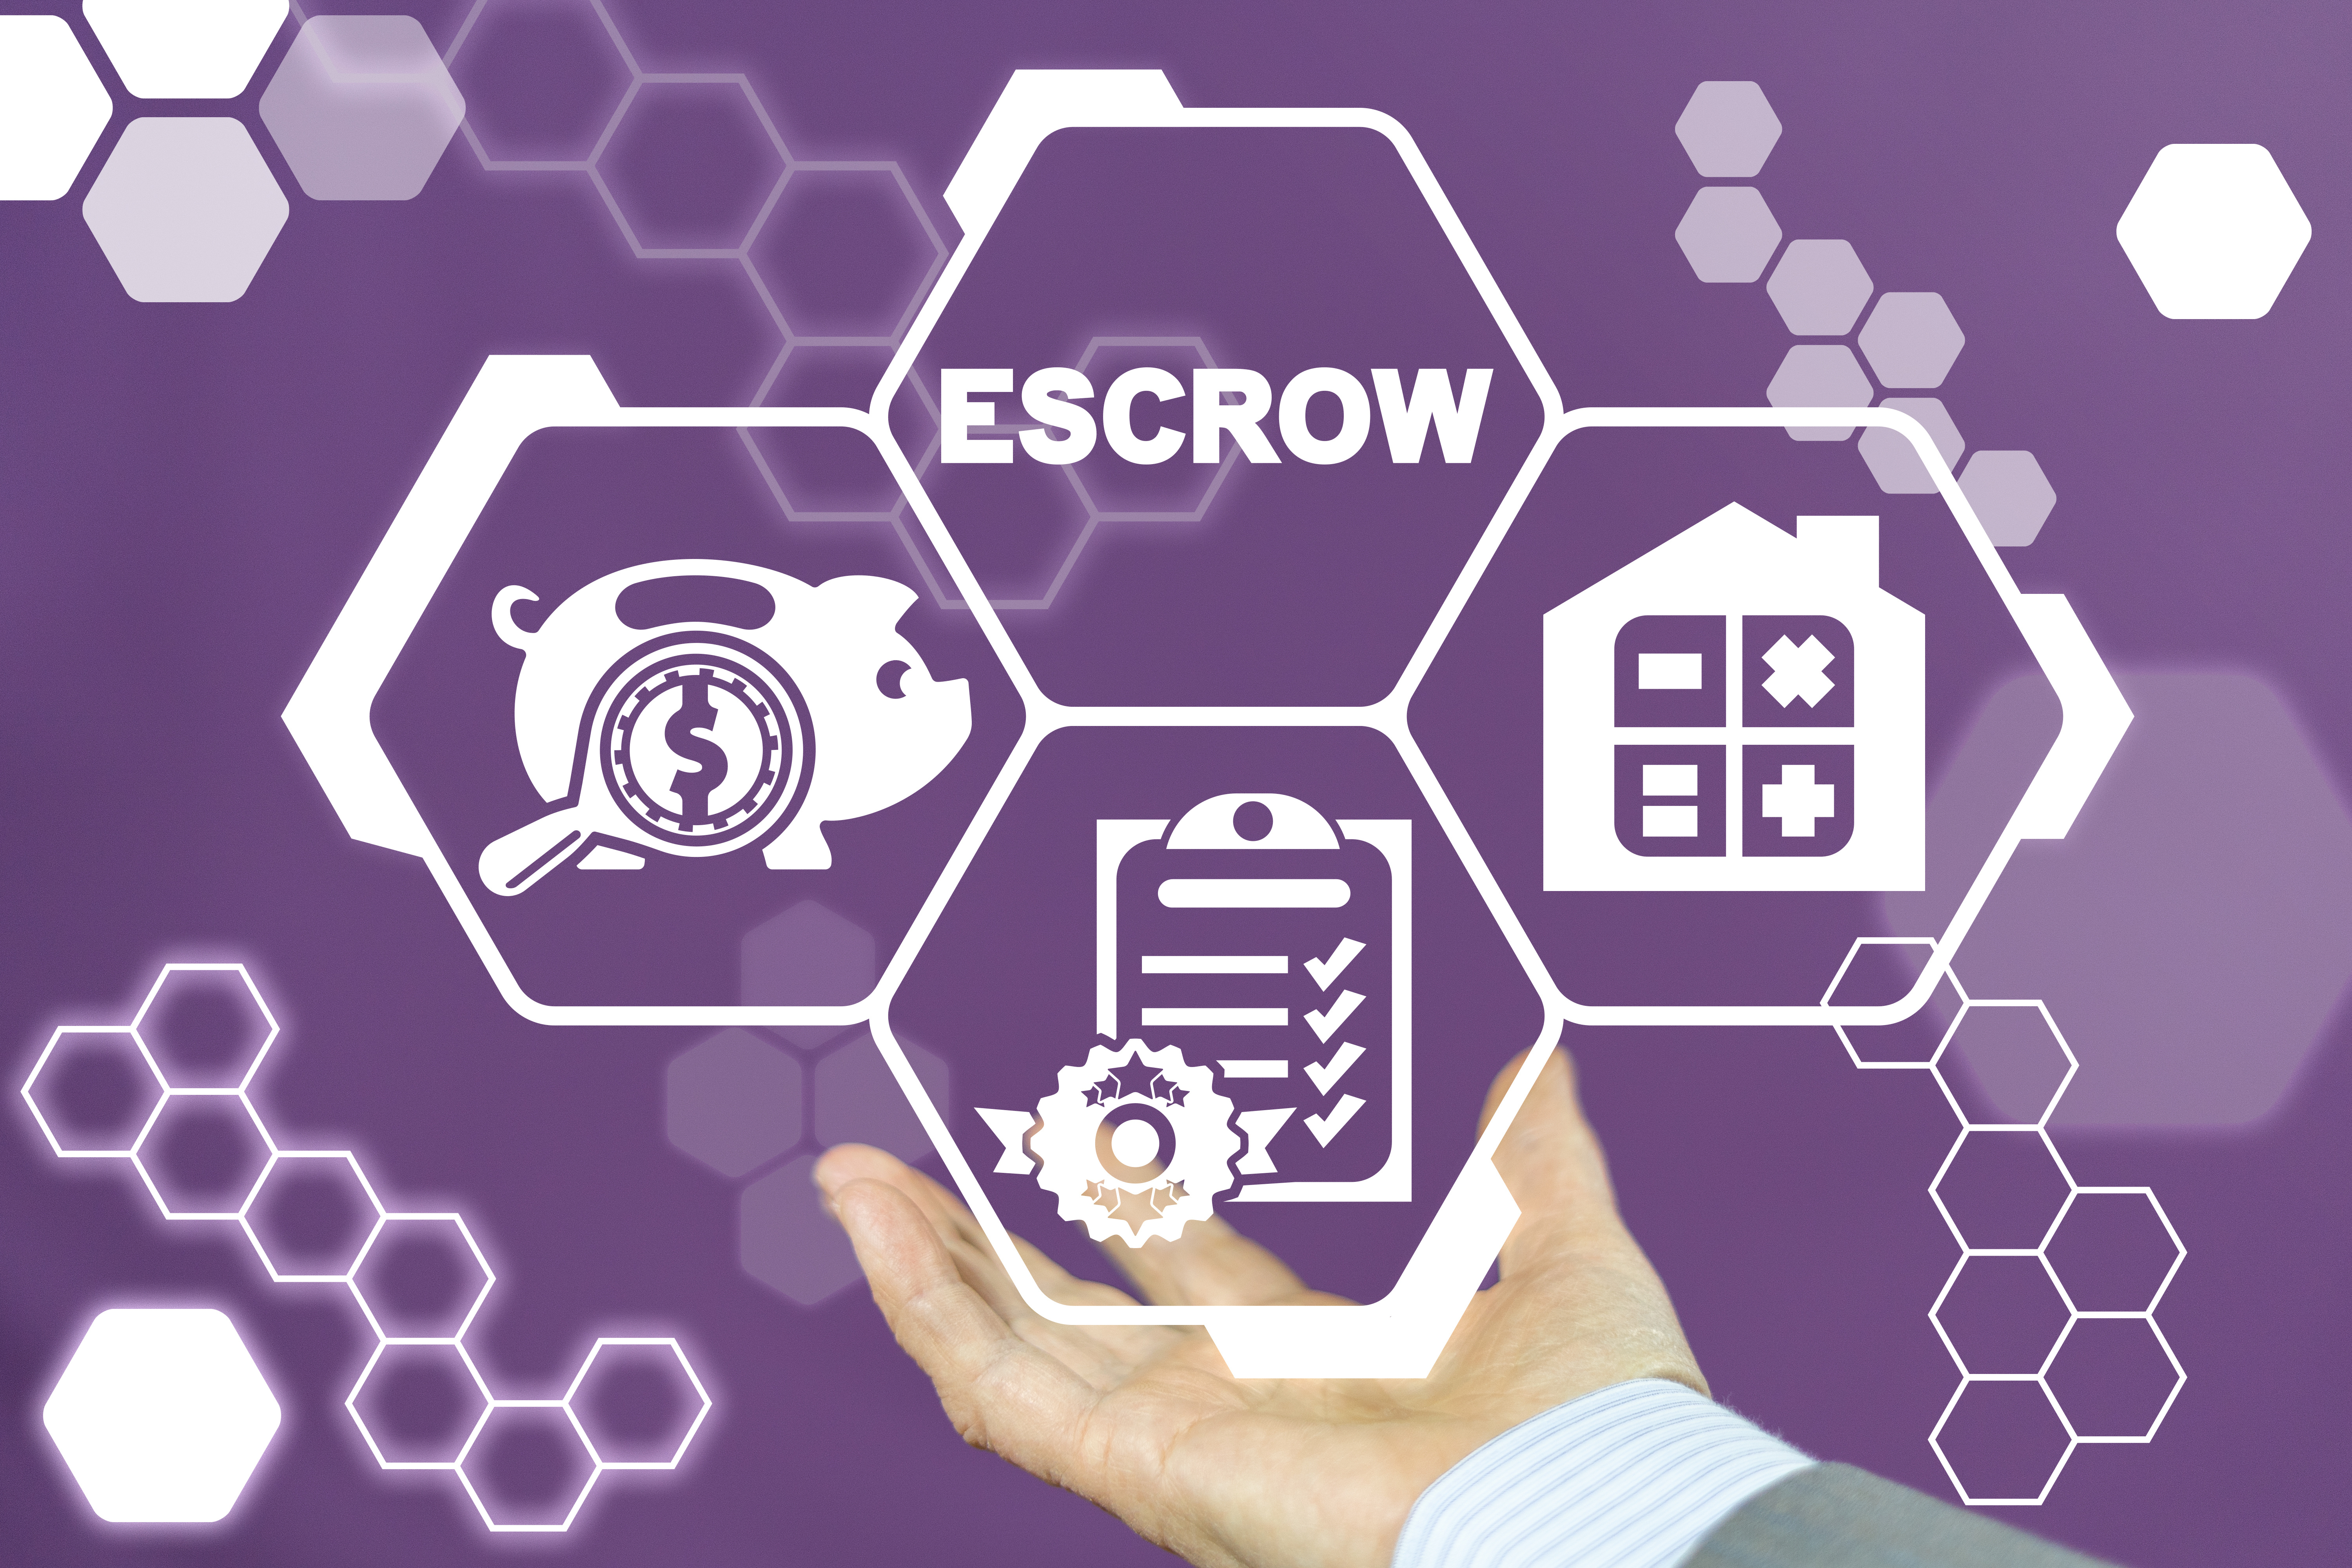 Home Mortgage Information: Learn More About Escrow and Escrow Analysis